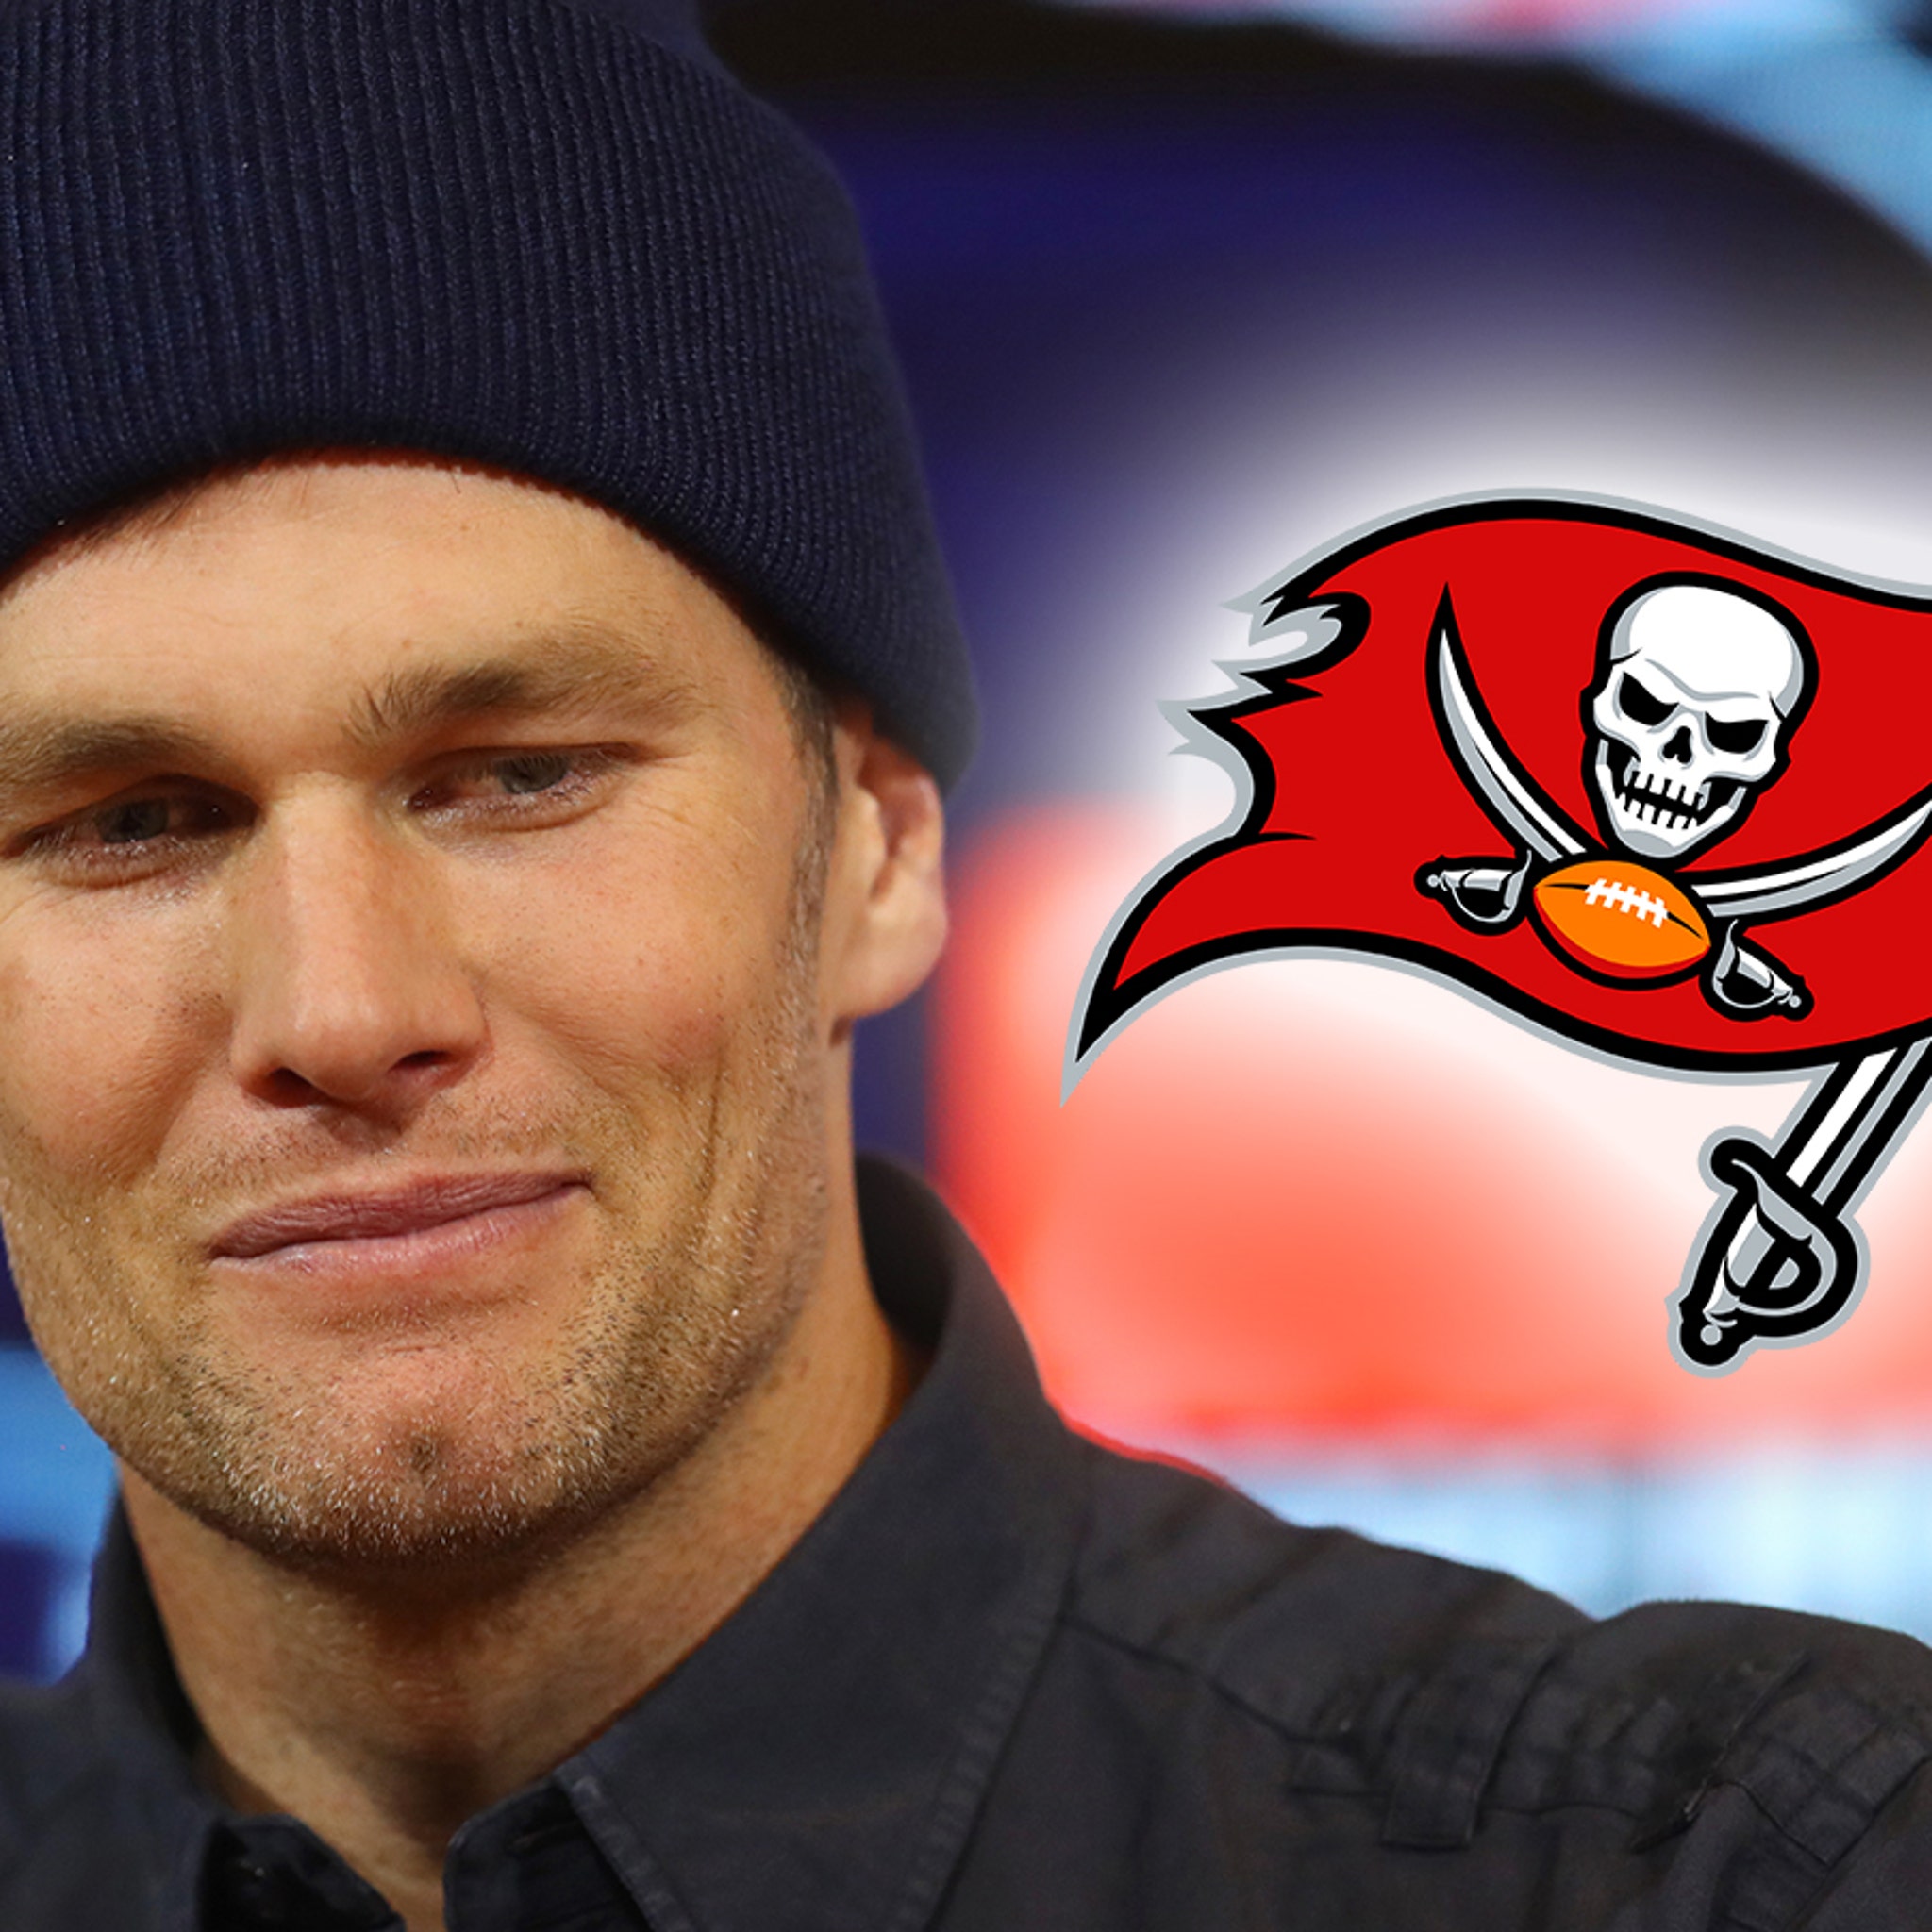 Bucs WR Chris Godwin gives up #12 out of respect for Tom Brady